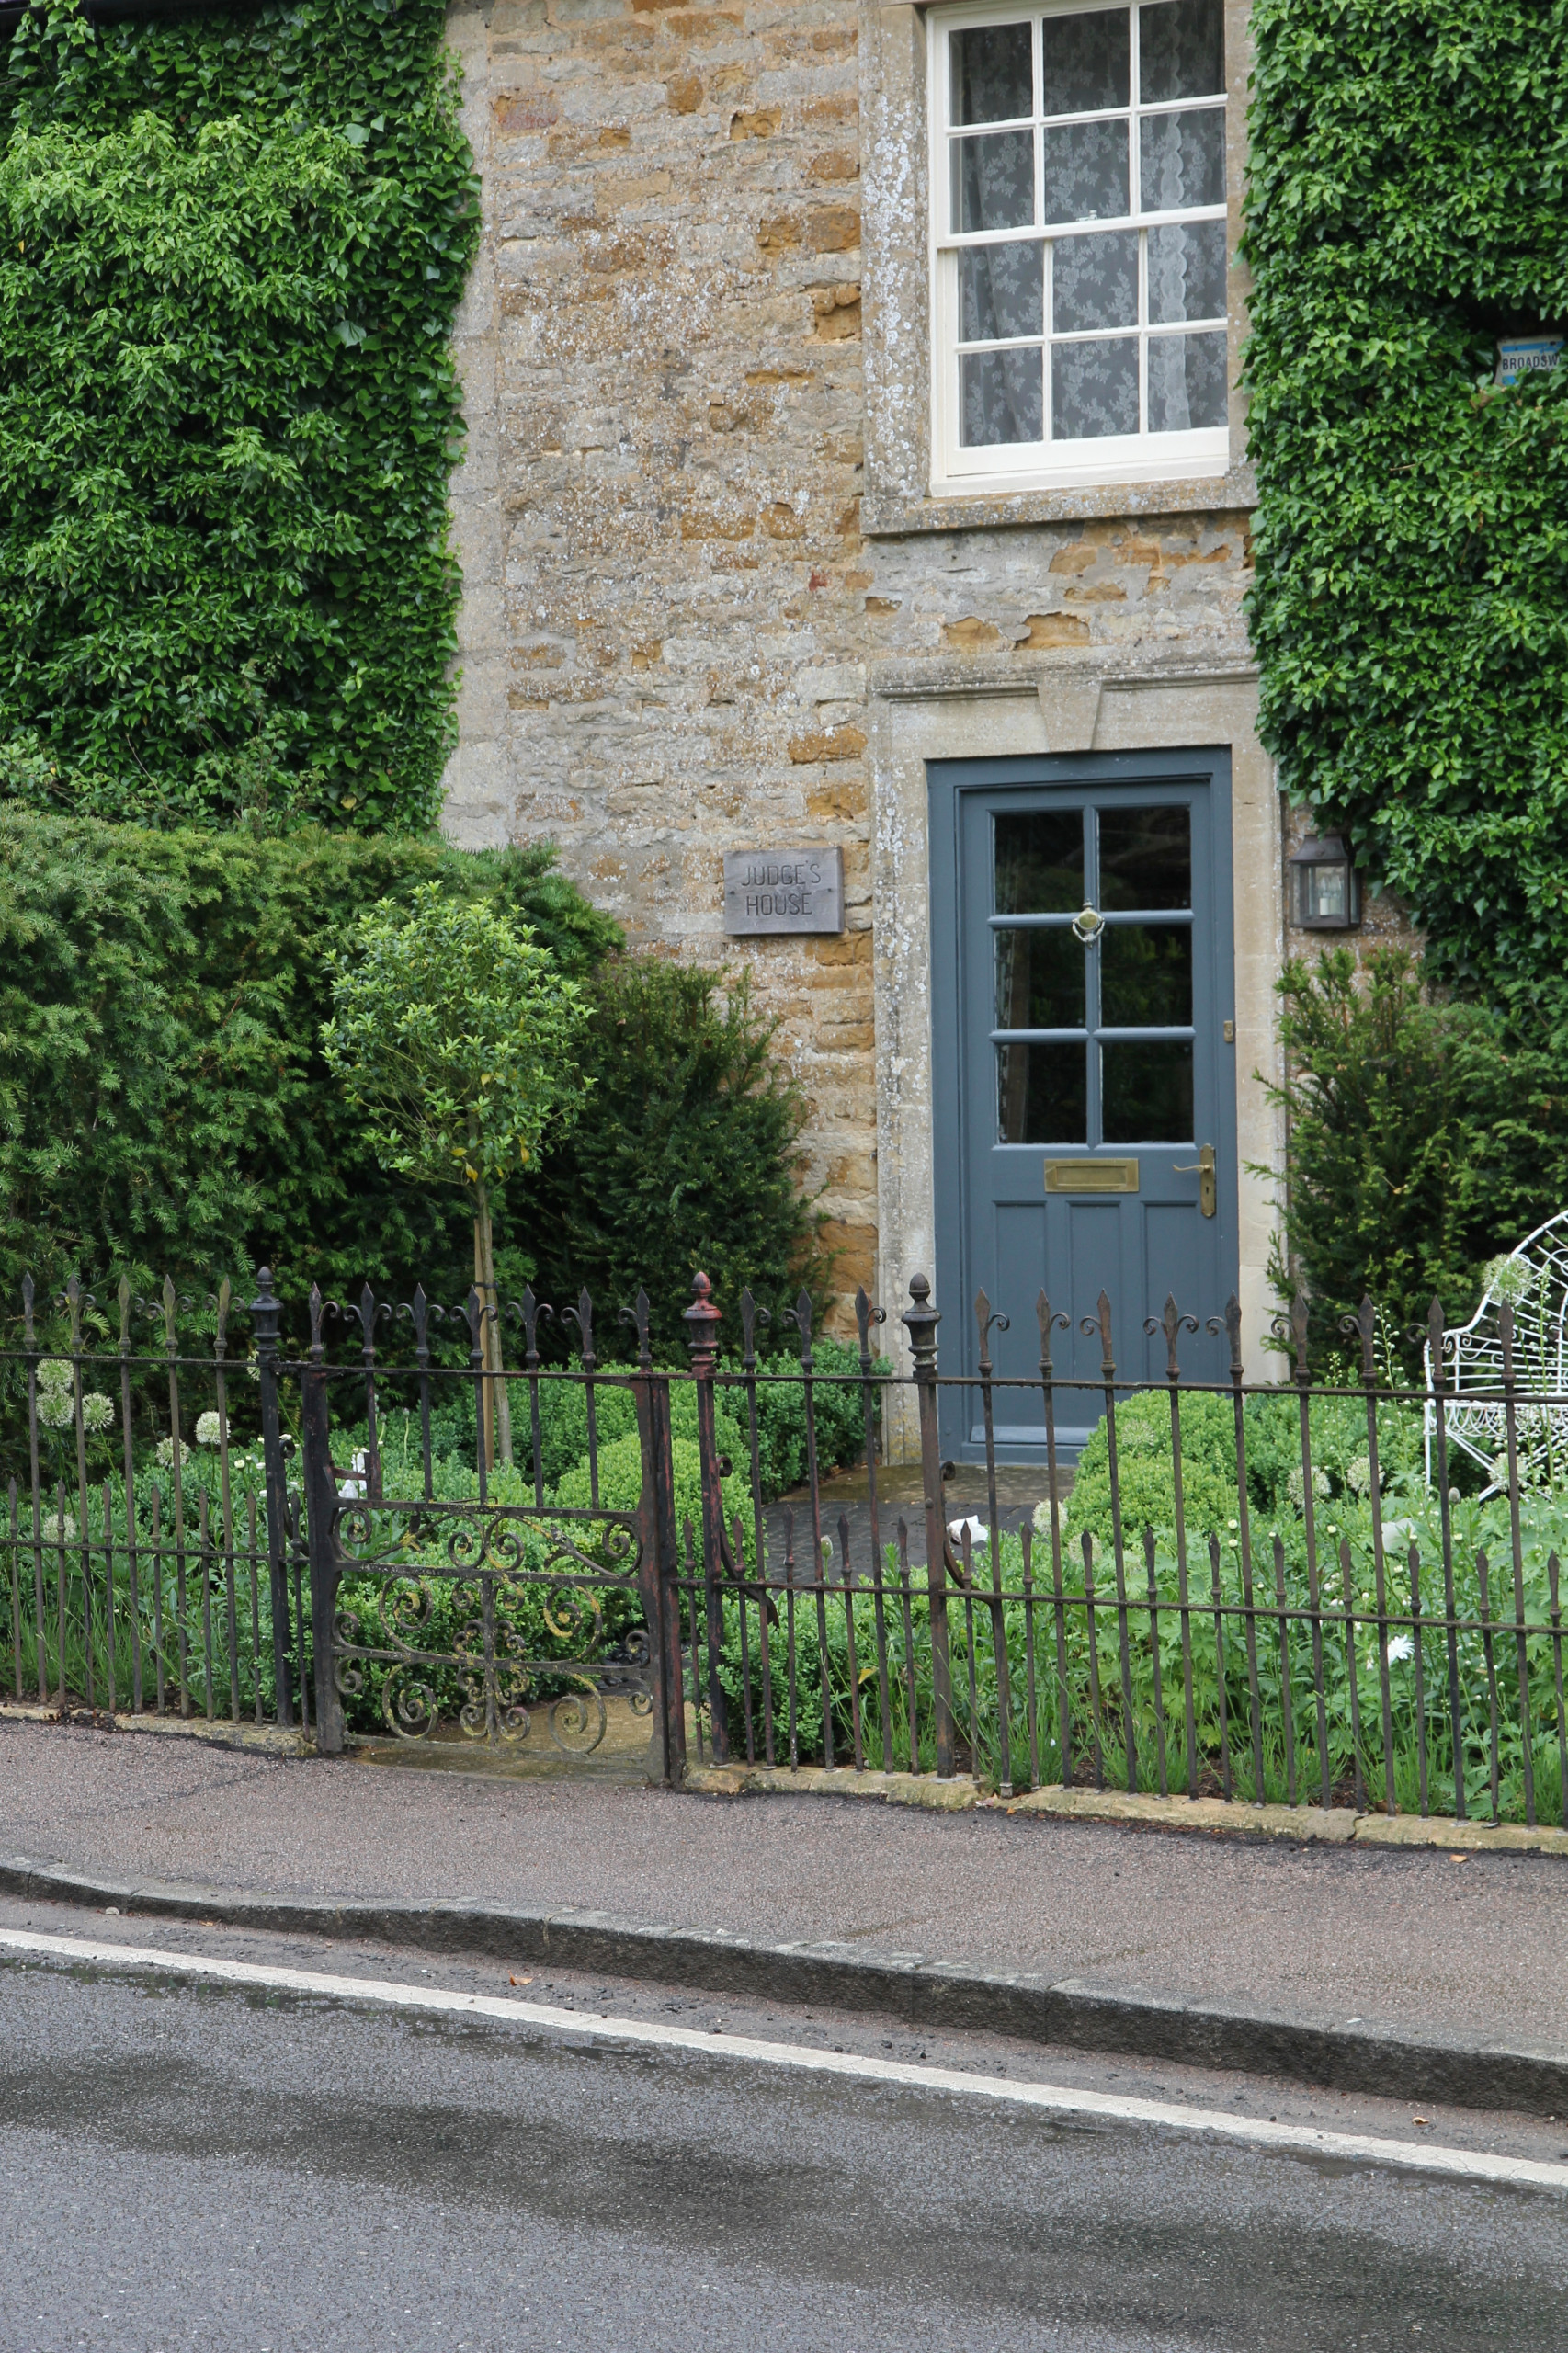  Design Ideas For Small Front Gardens Houzz Uk - Garden Design Ideas For Small Front Gardens Uk